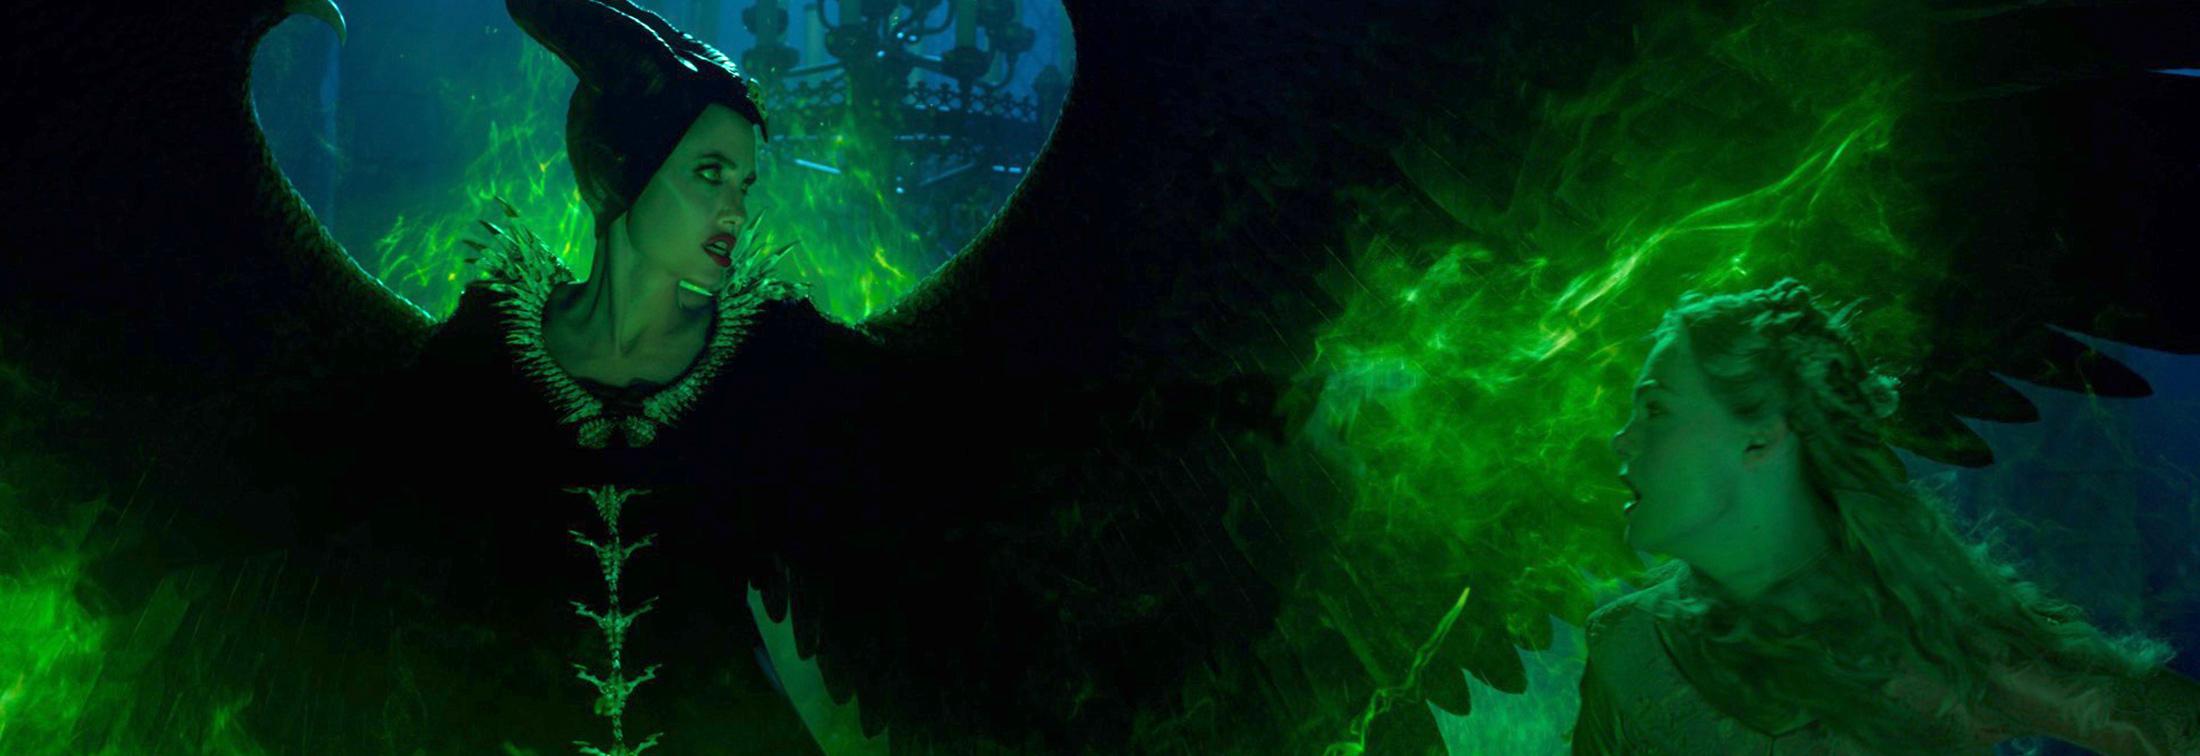 Maleficent: Mistress of Evil Review: Disney still have some